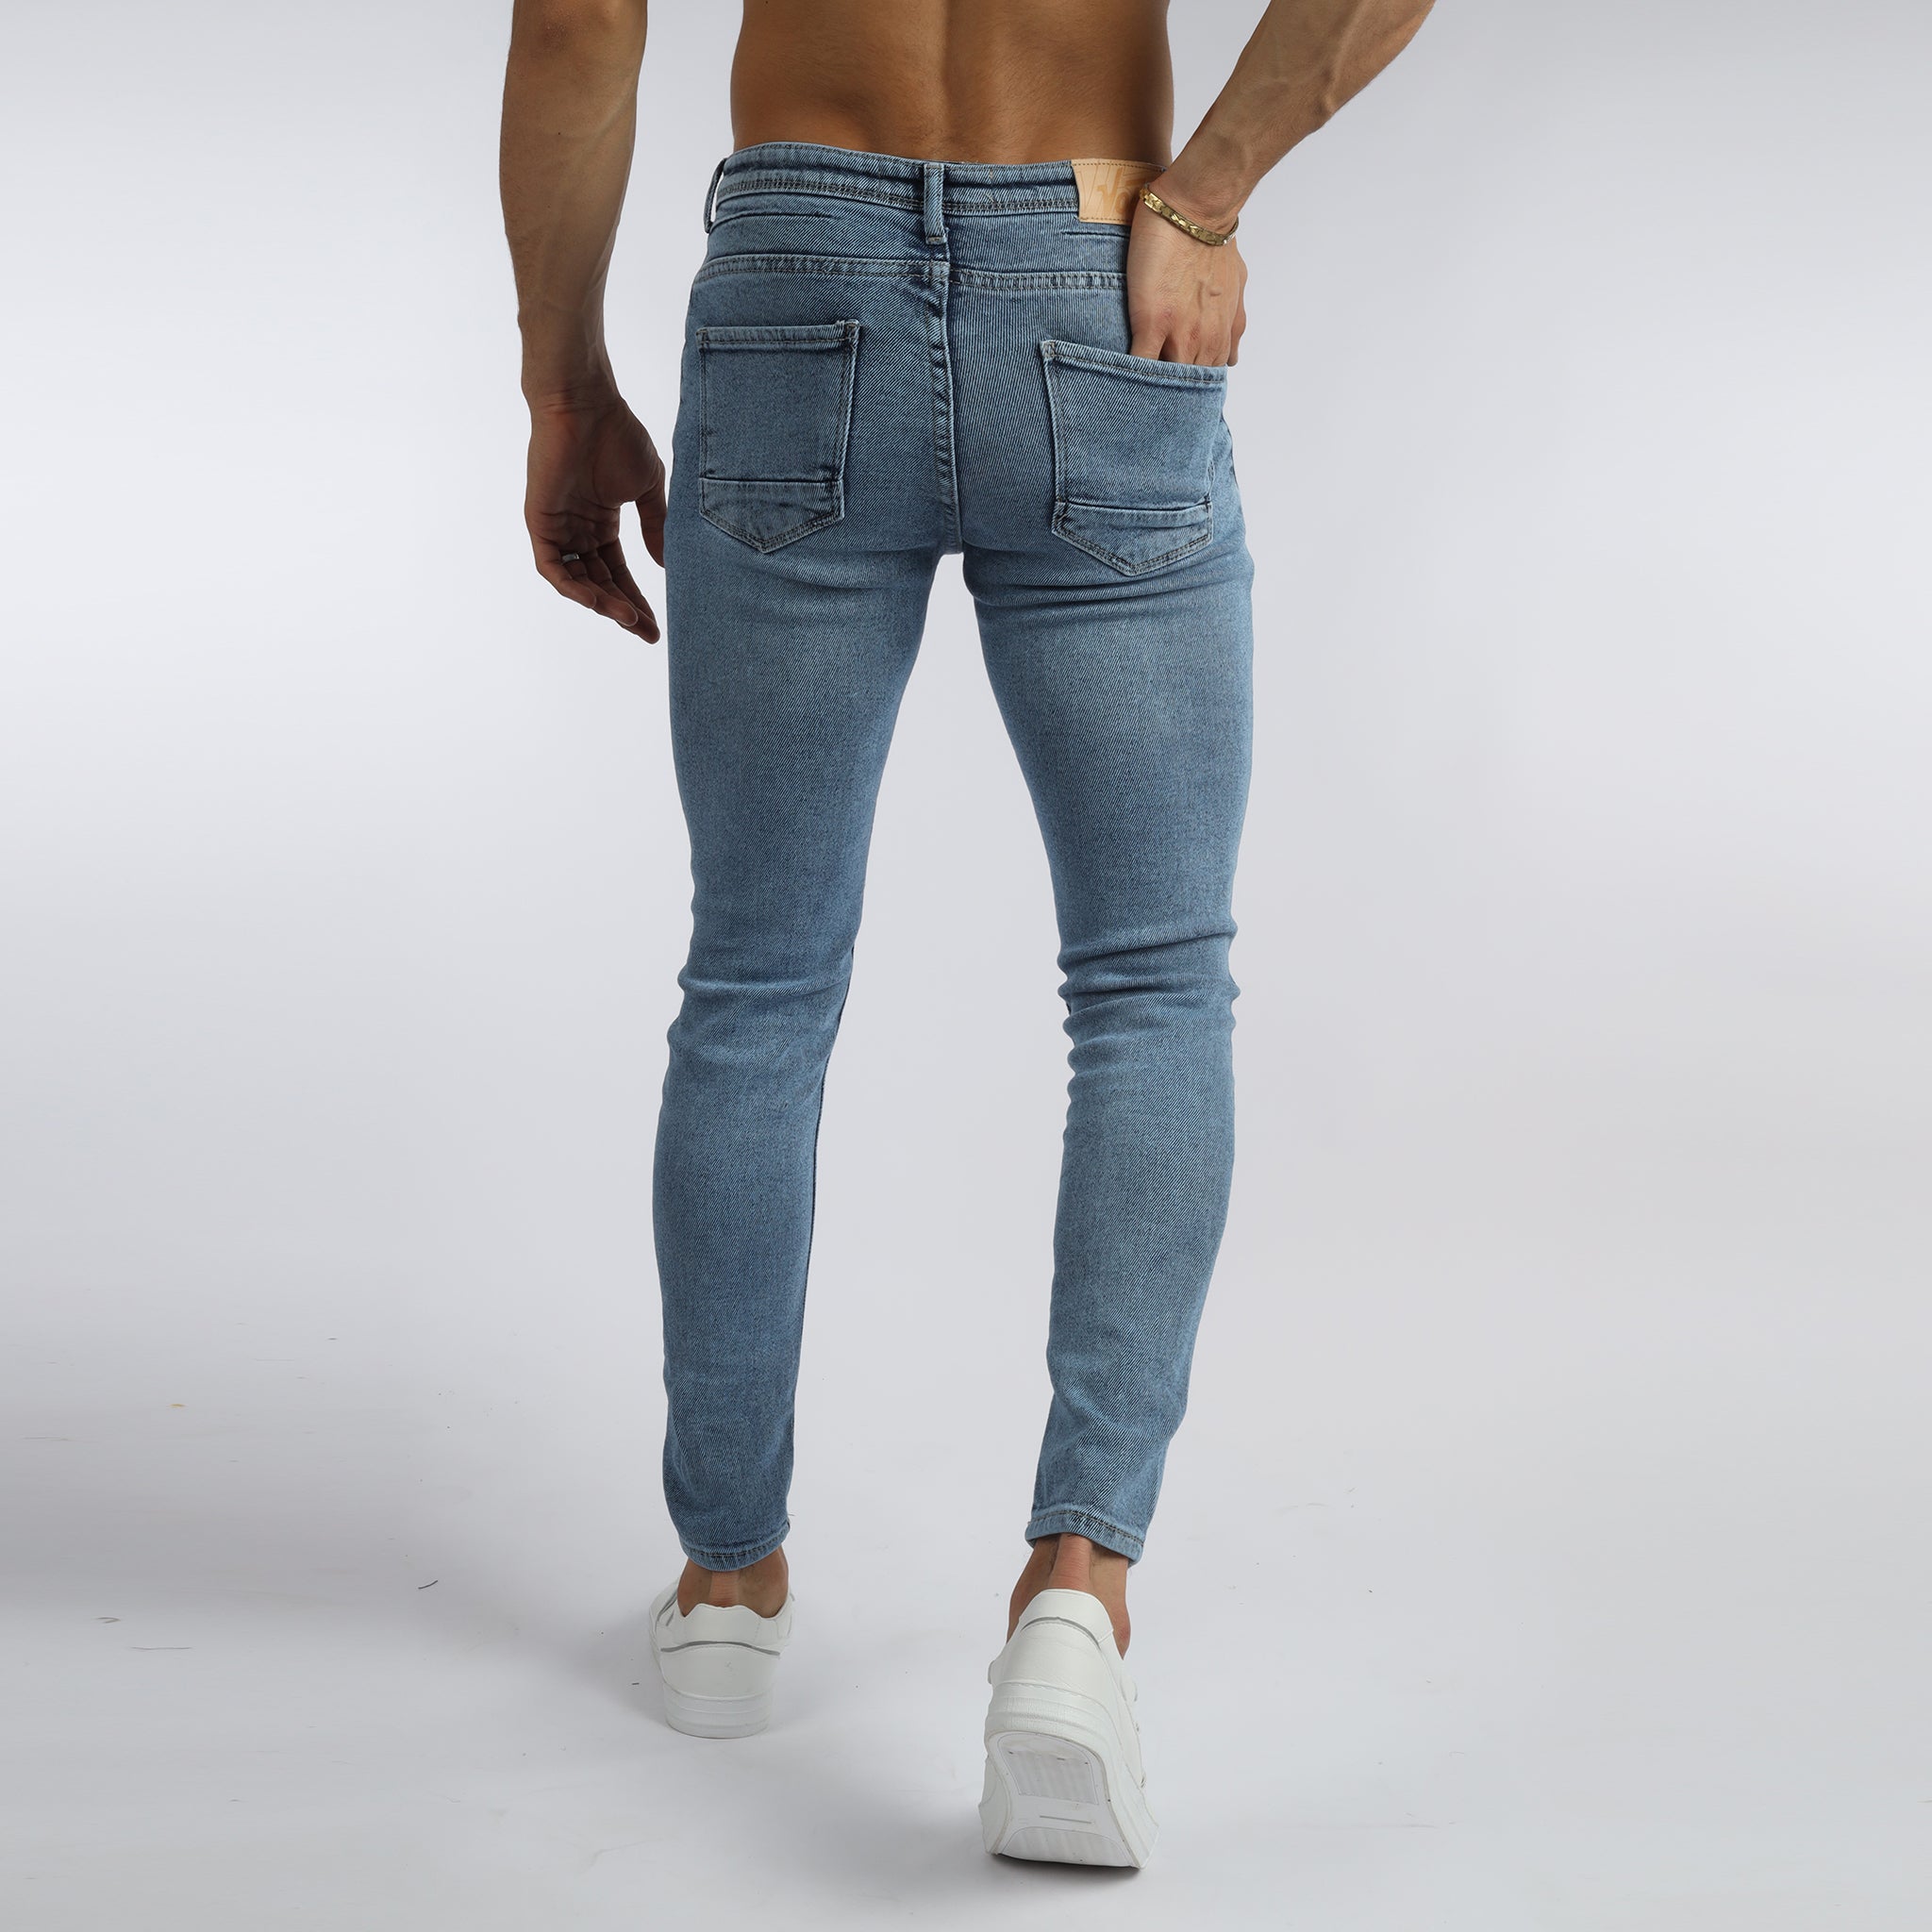 Vote-Skinny Trousers- Ripped steel blue jeans